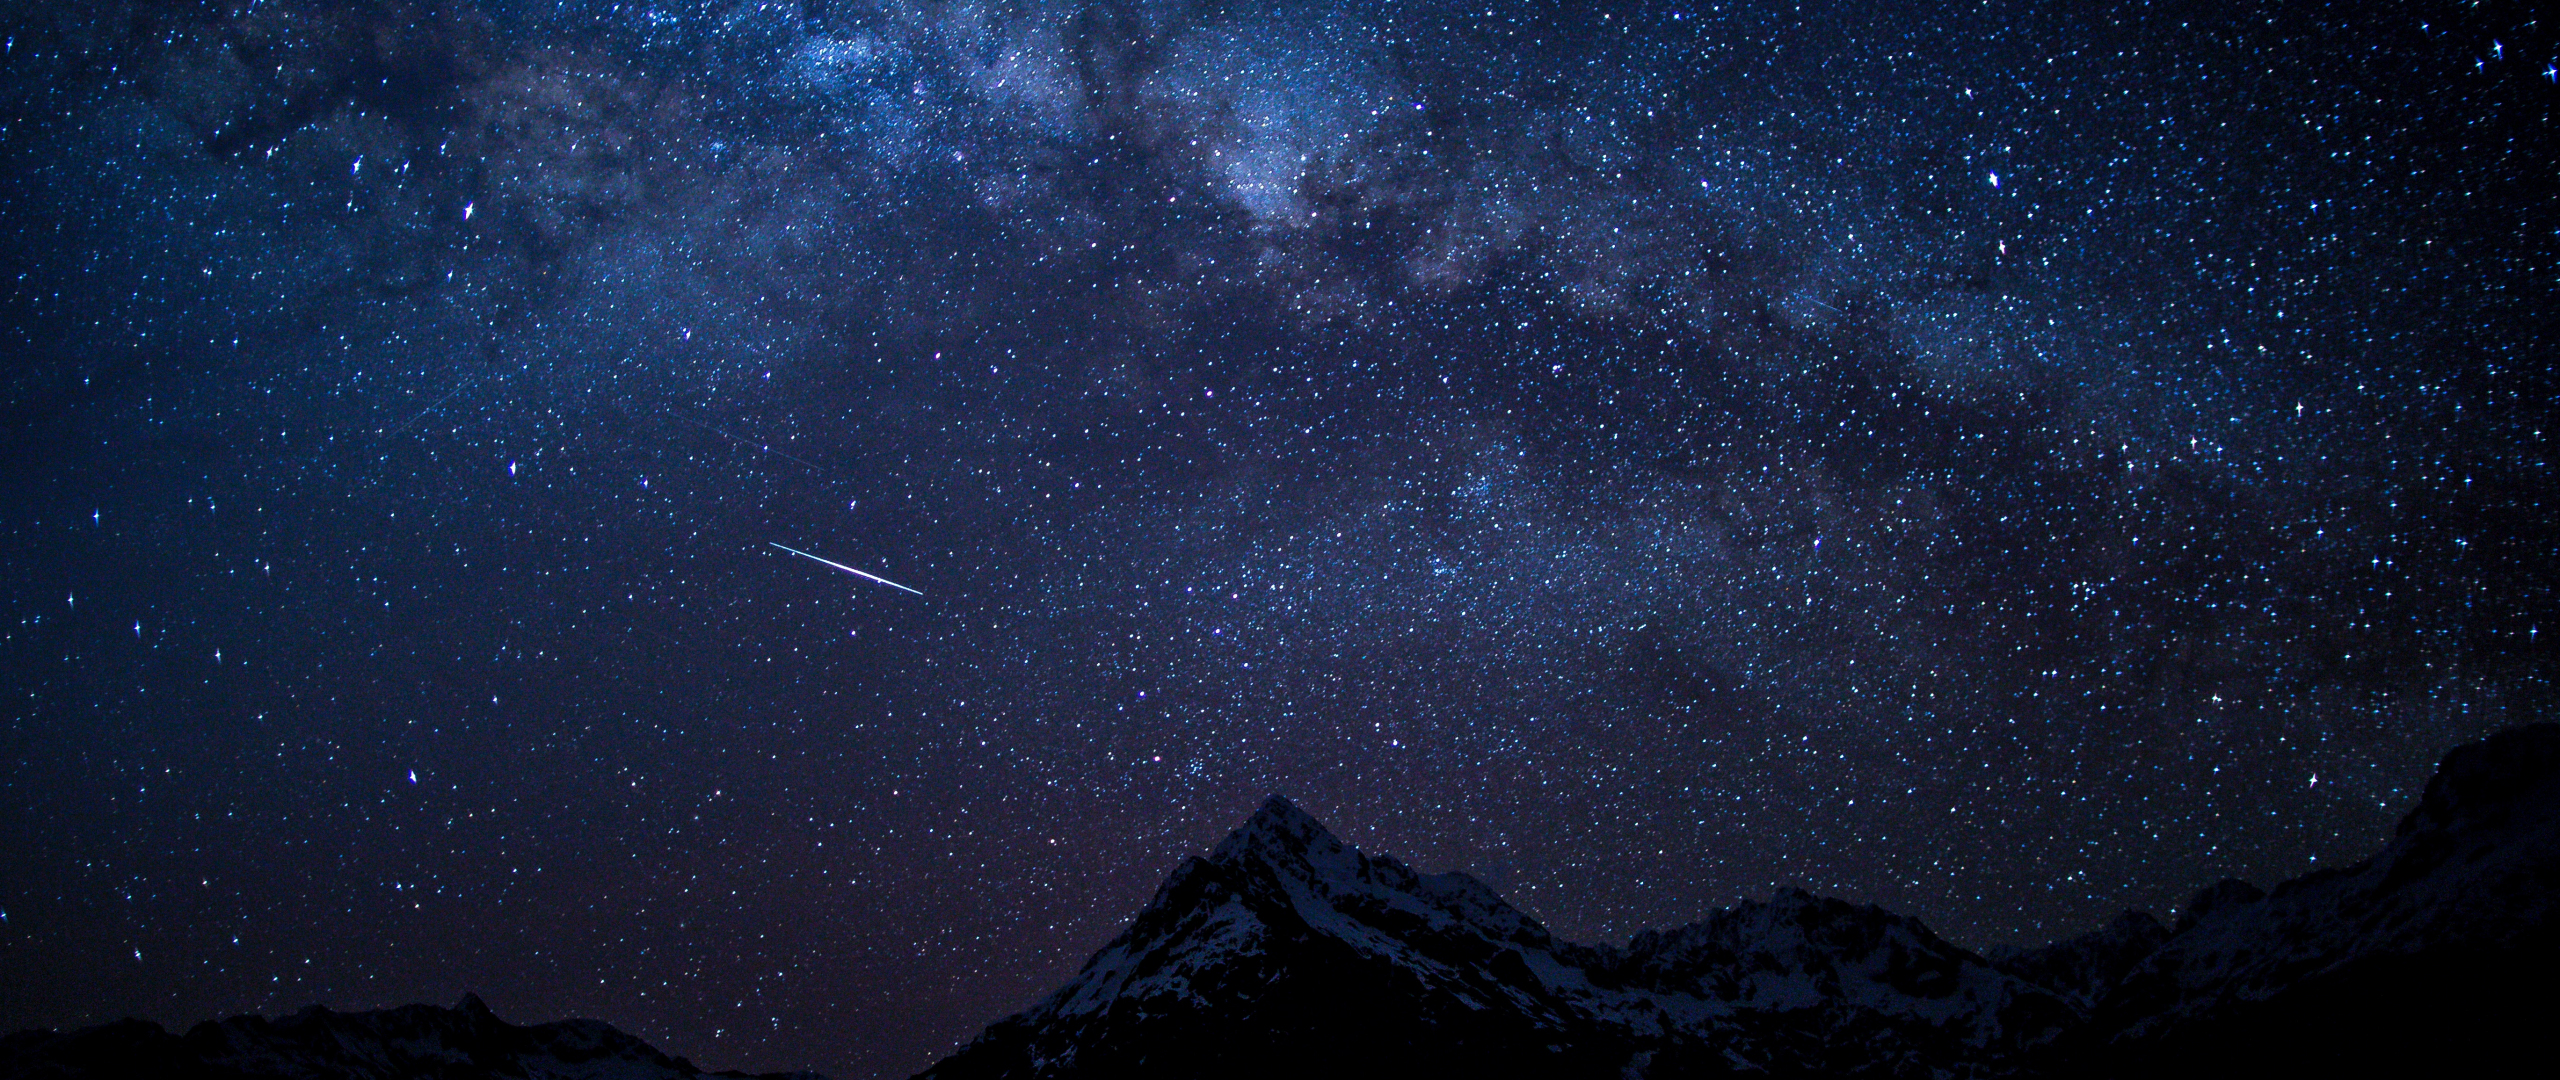 Download wallpaper 2560x1080 starry sky, night, mountains, nature, dual wide  2560x1080 hd background, 678